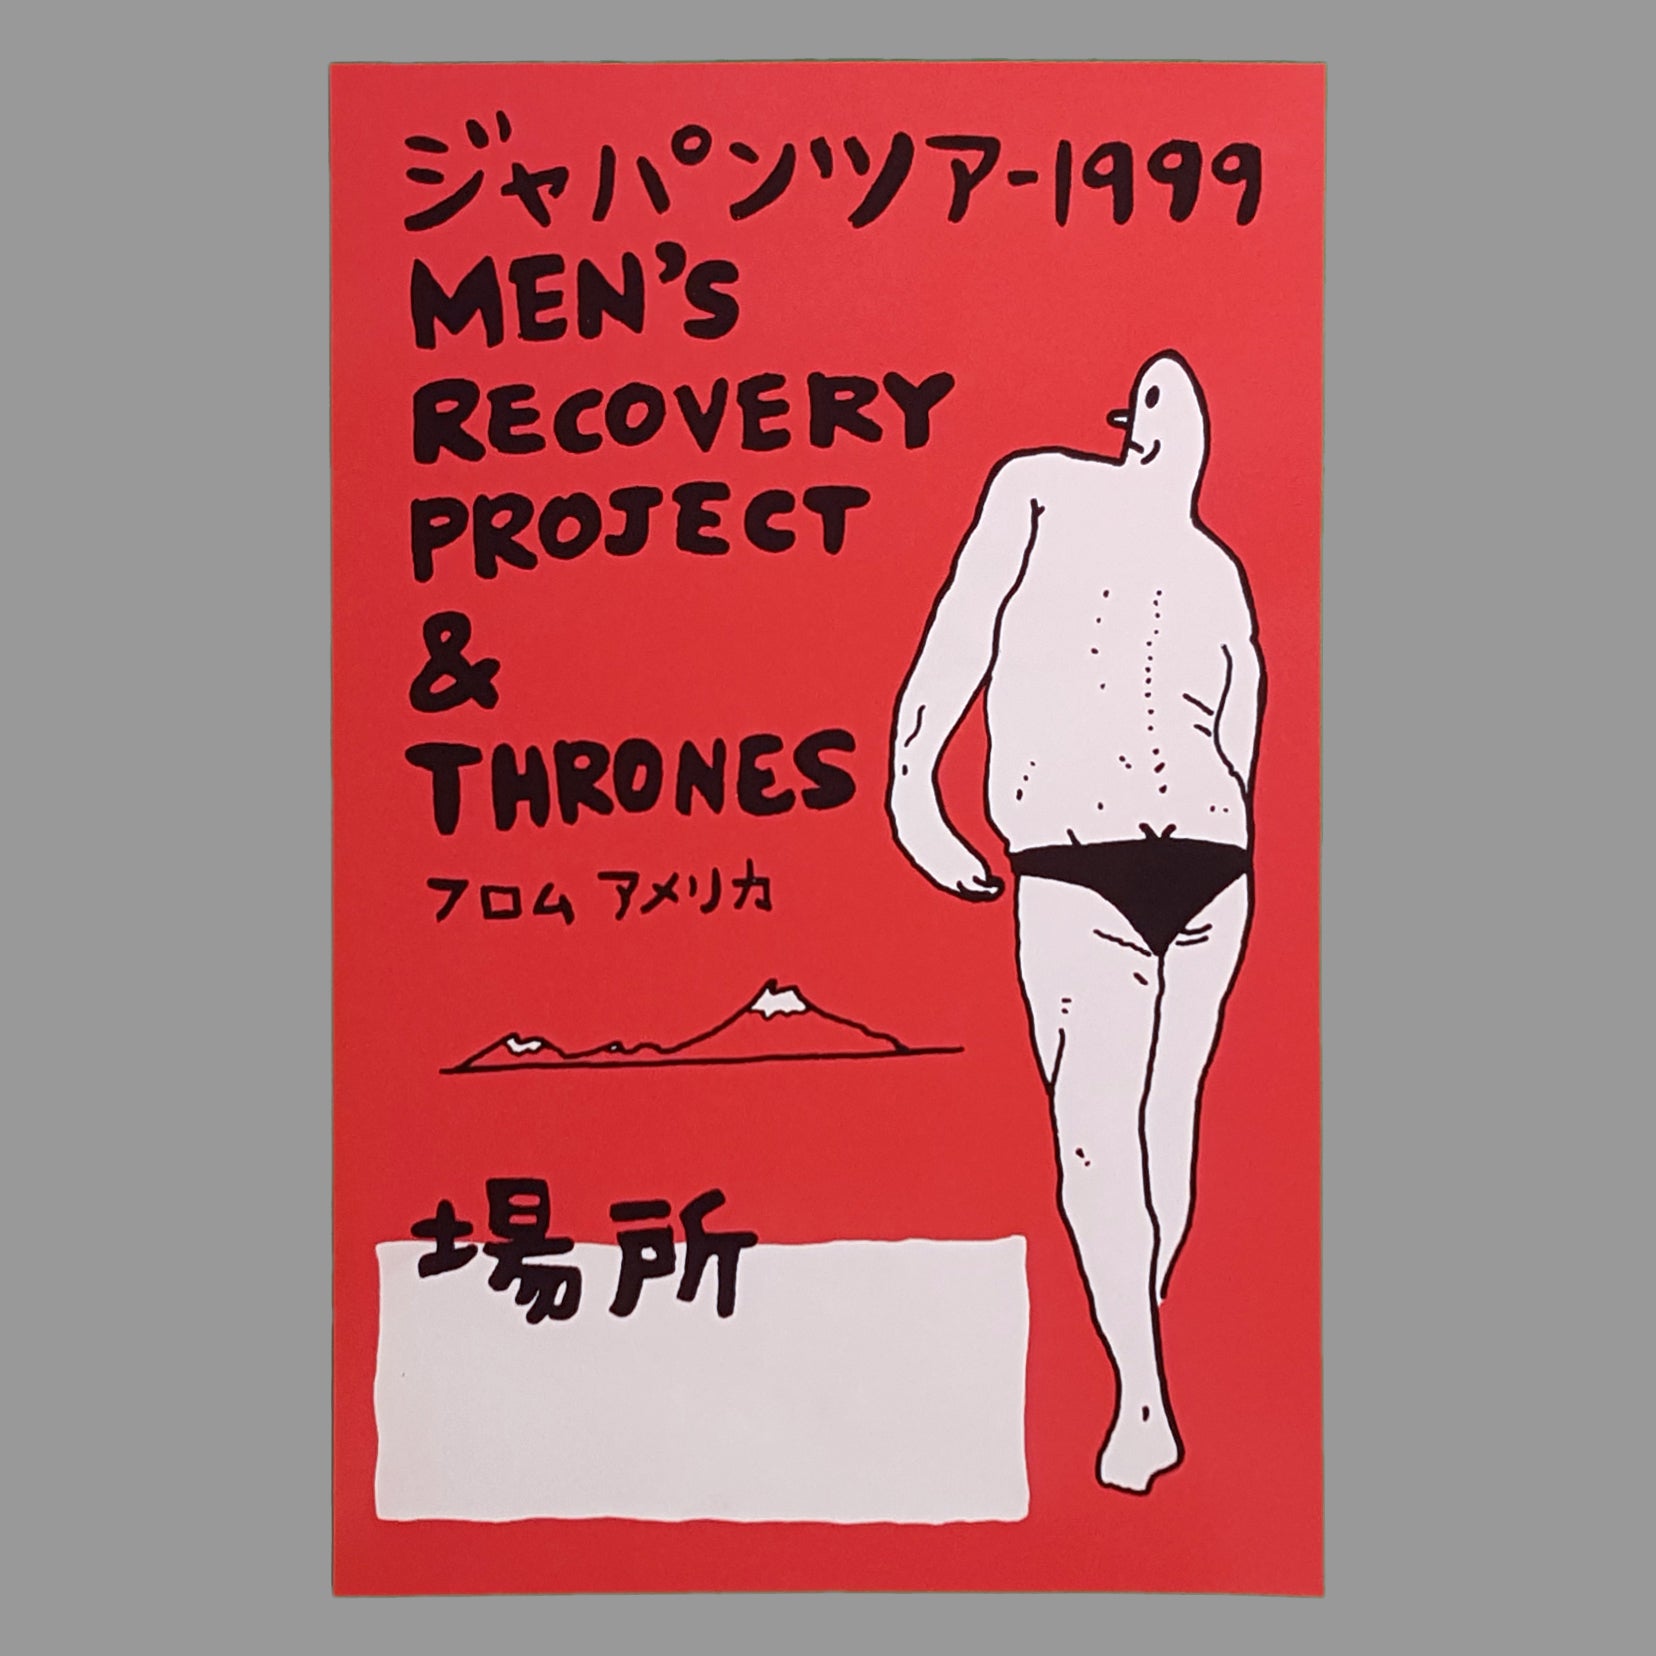 Men's Recovery Project / Thrones '99 Japan Tour Poster - Monoroid